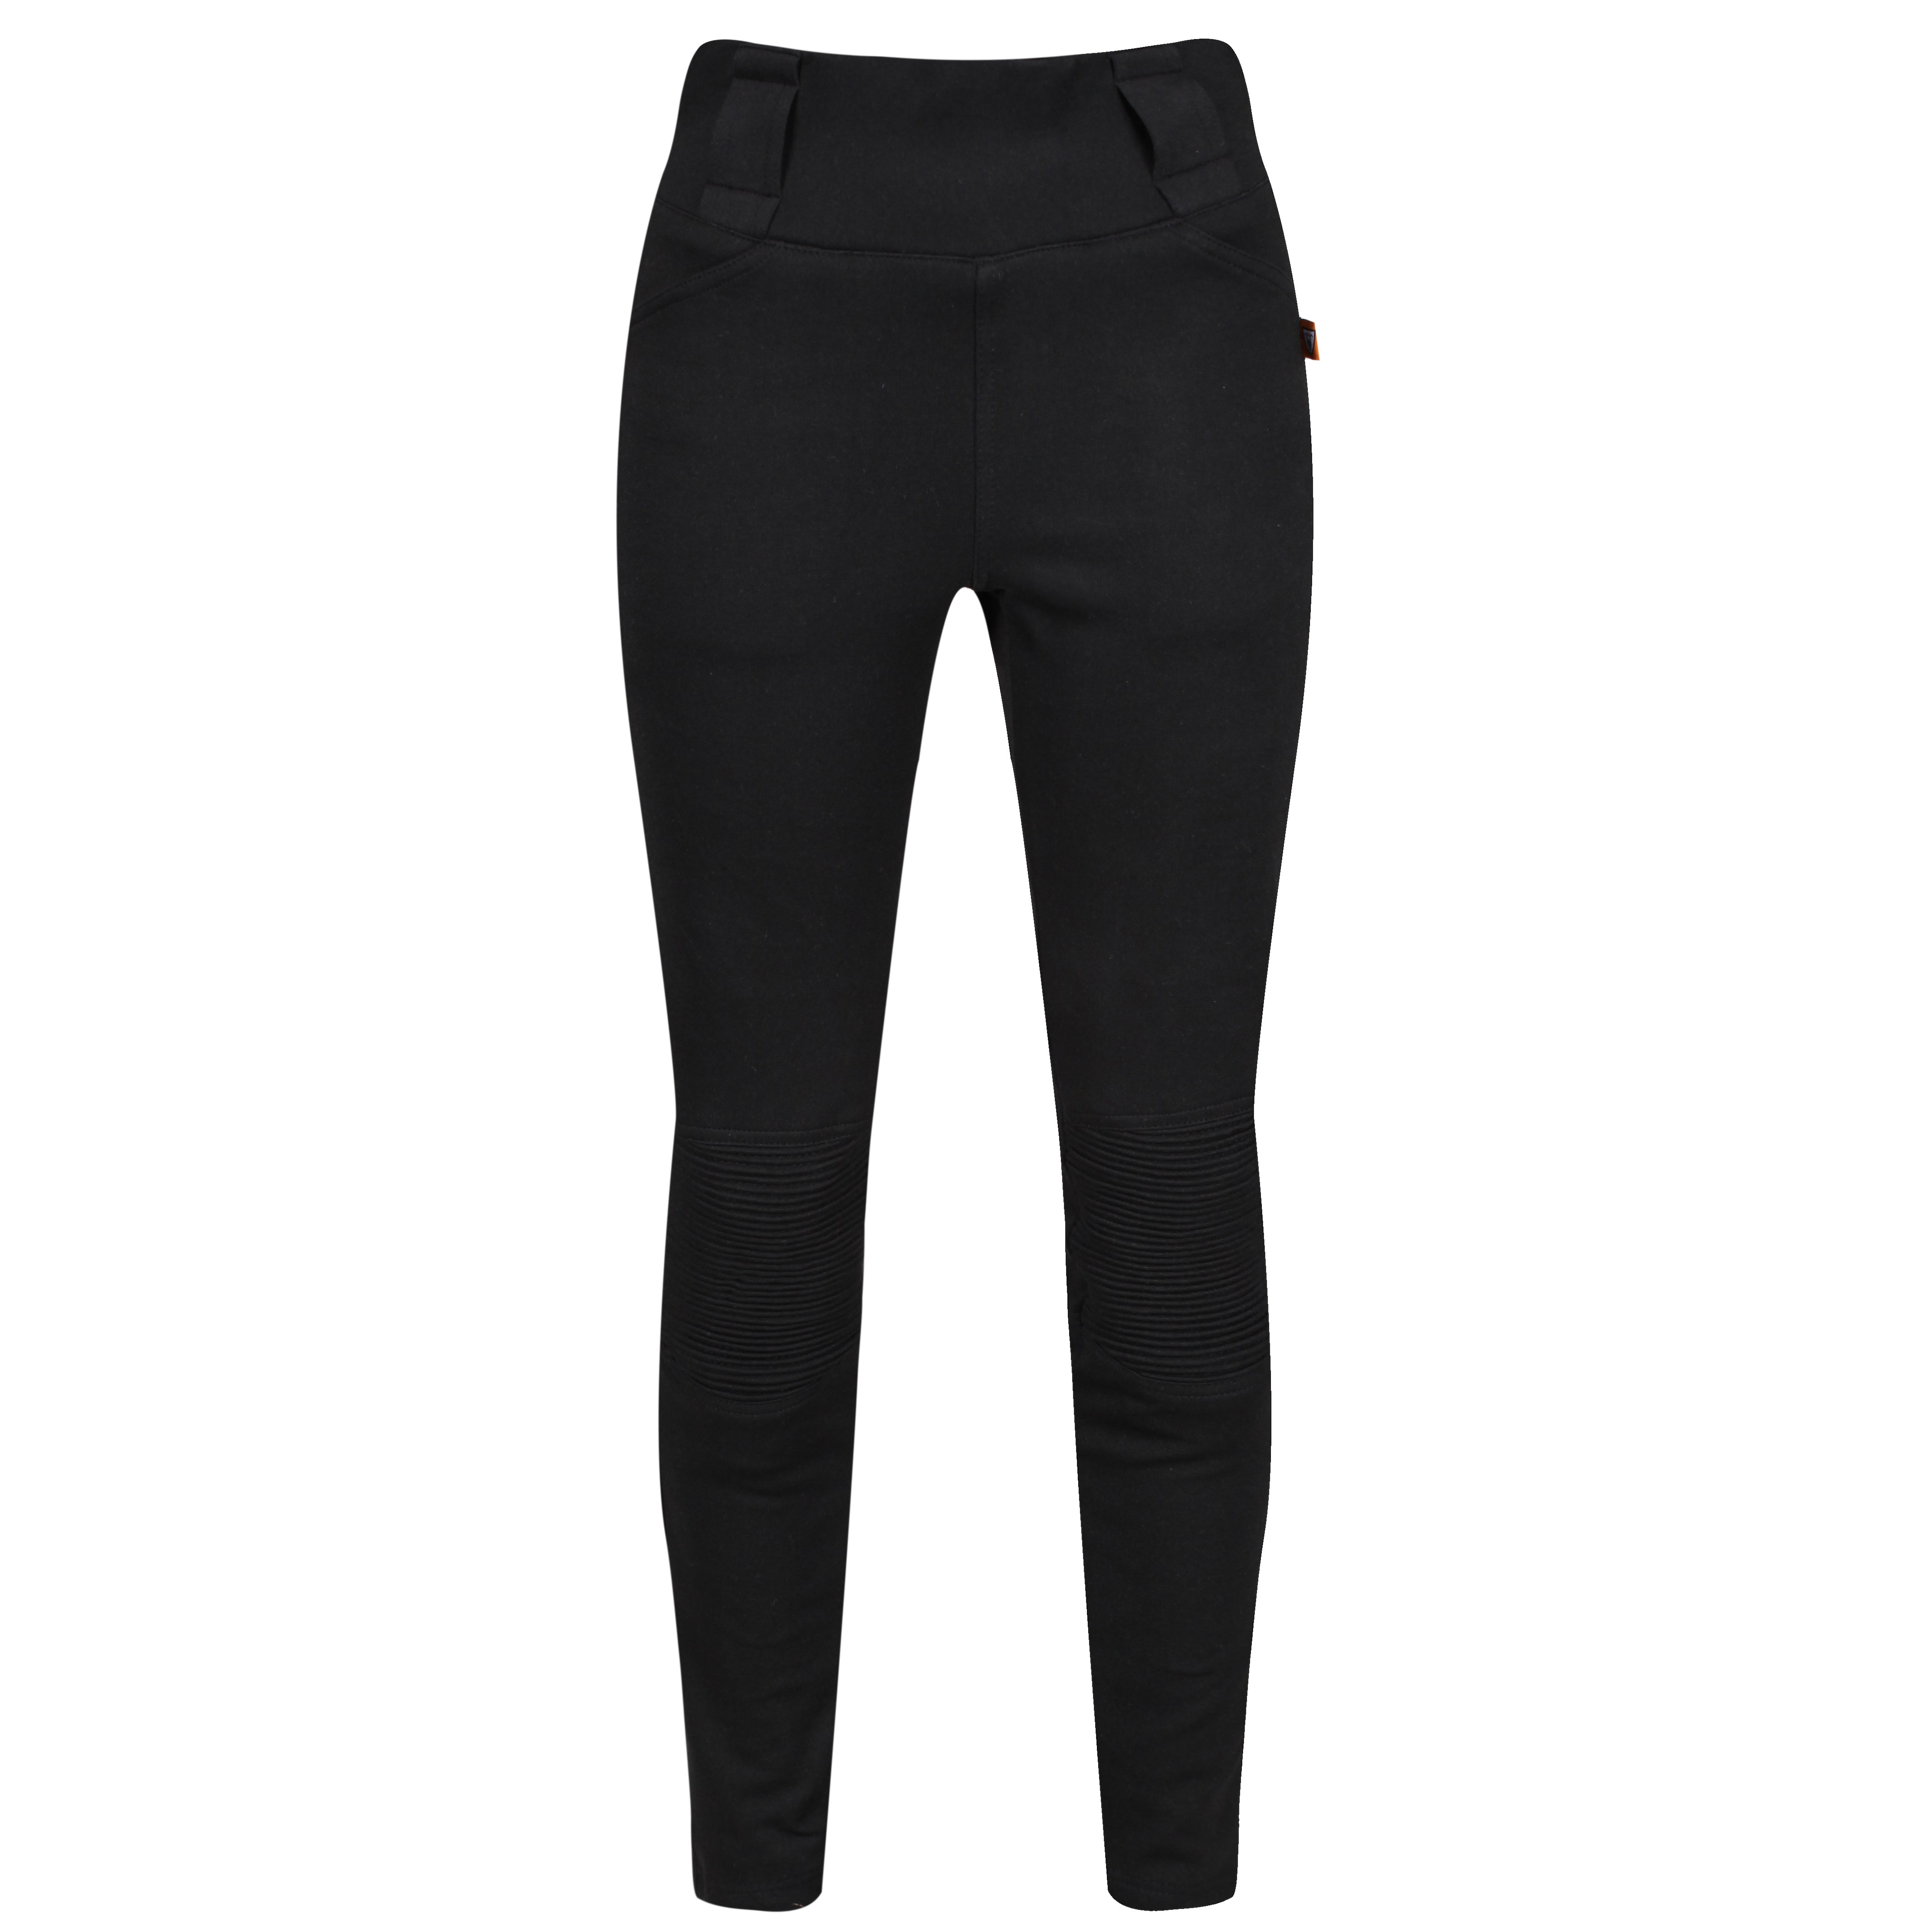 black women's motorcycle ribbed knee design leggings  from MotoGirl from the front